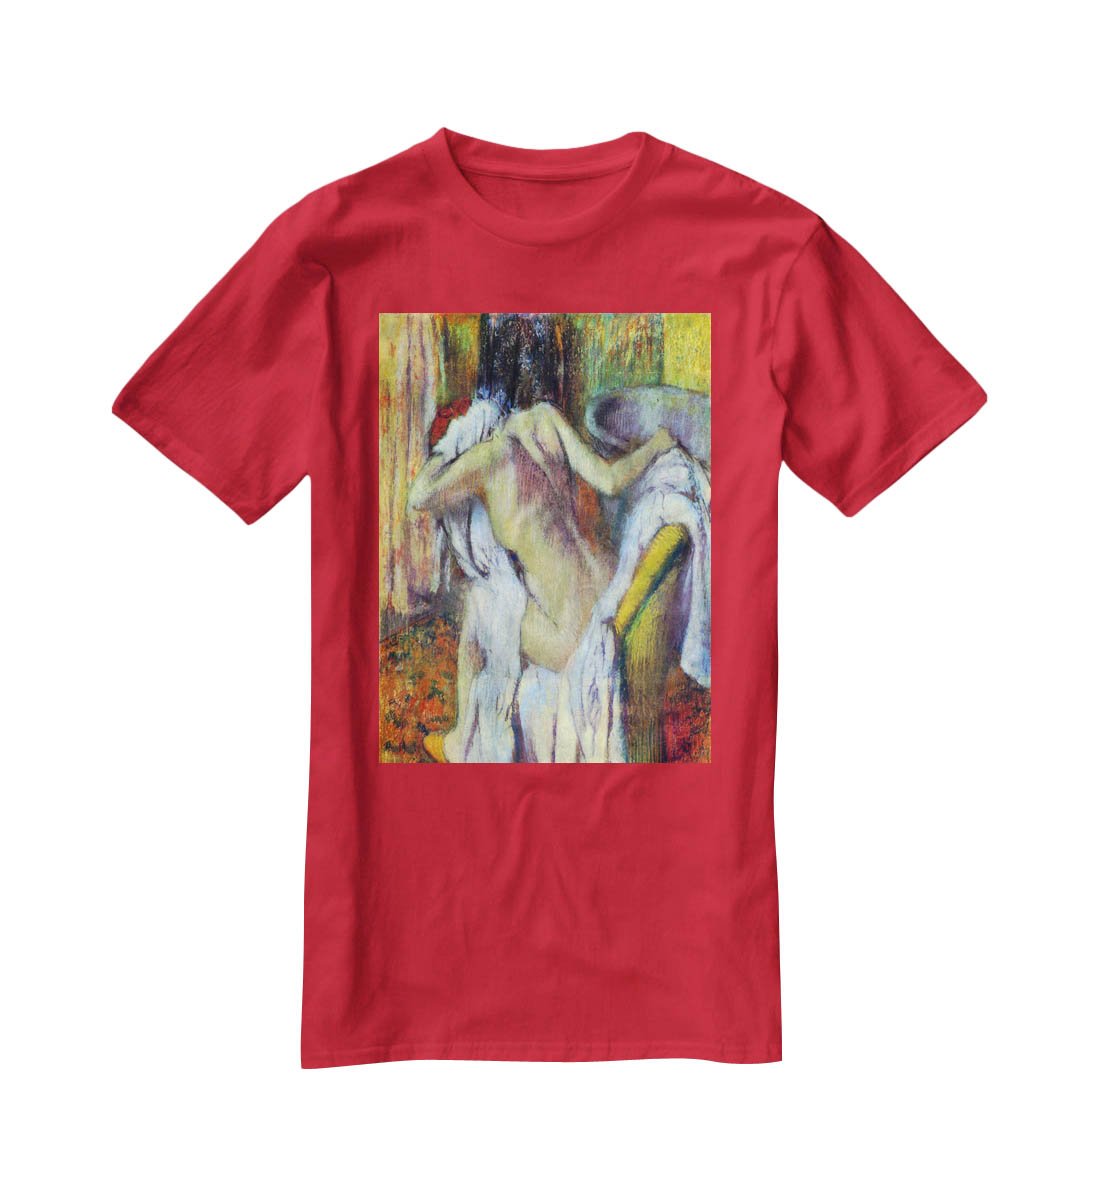 After Bathing 4 by Degas T-Shirt - Canvas Art Rocks - 4